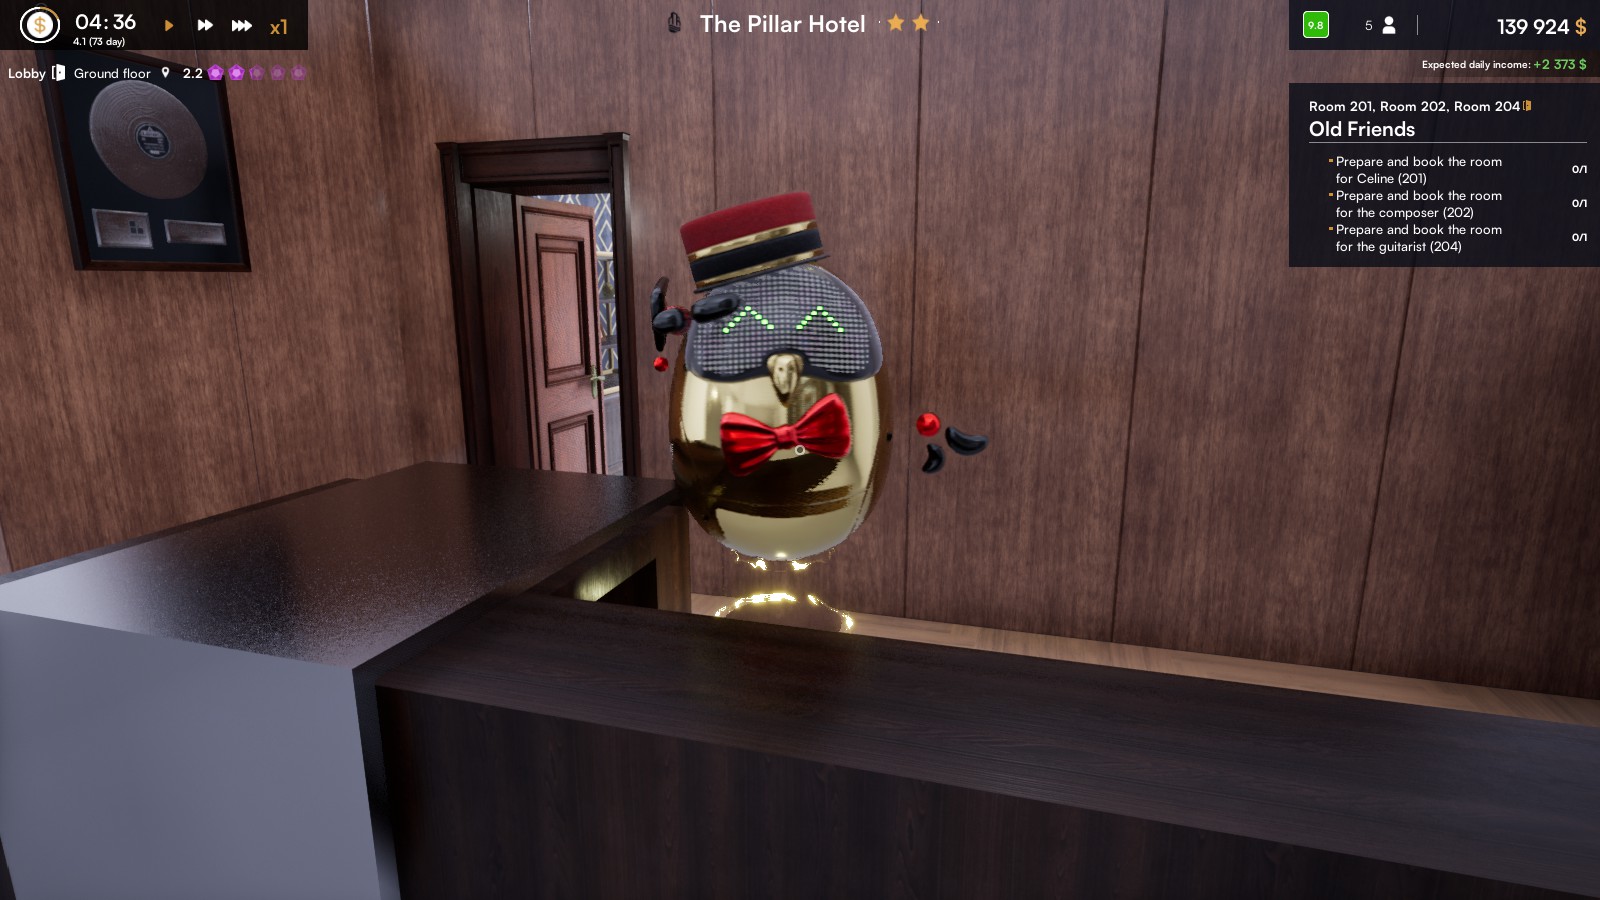 A saluting robot receptionist wearing a traditional bell boy hat, is saluting you as you pass by. Desk is black with a silver corner and a rare vinyl hangs a brown wooden wall.